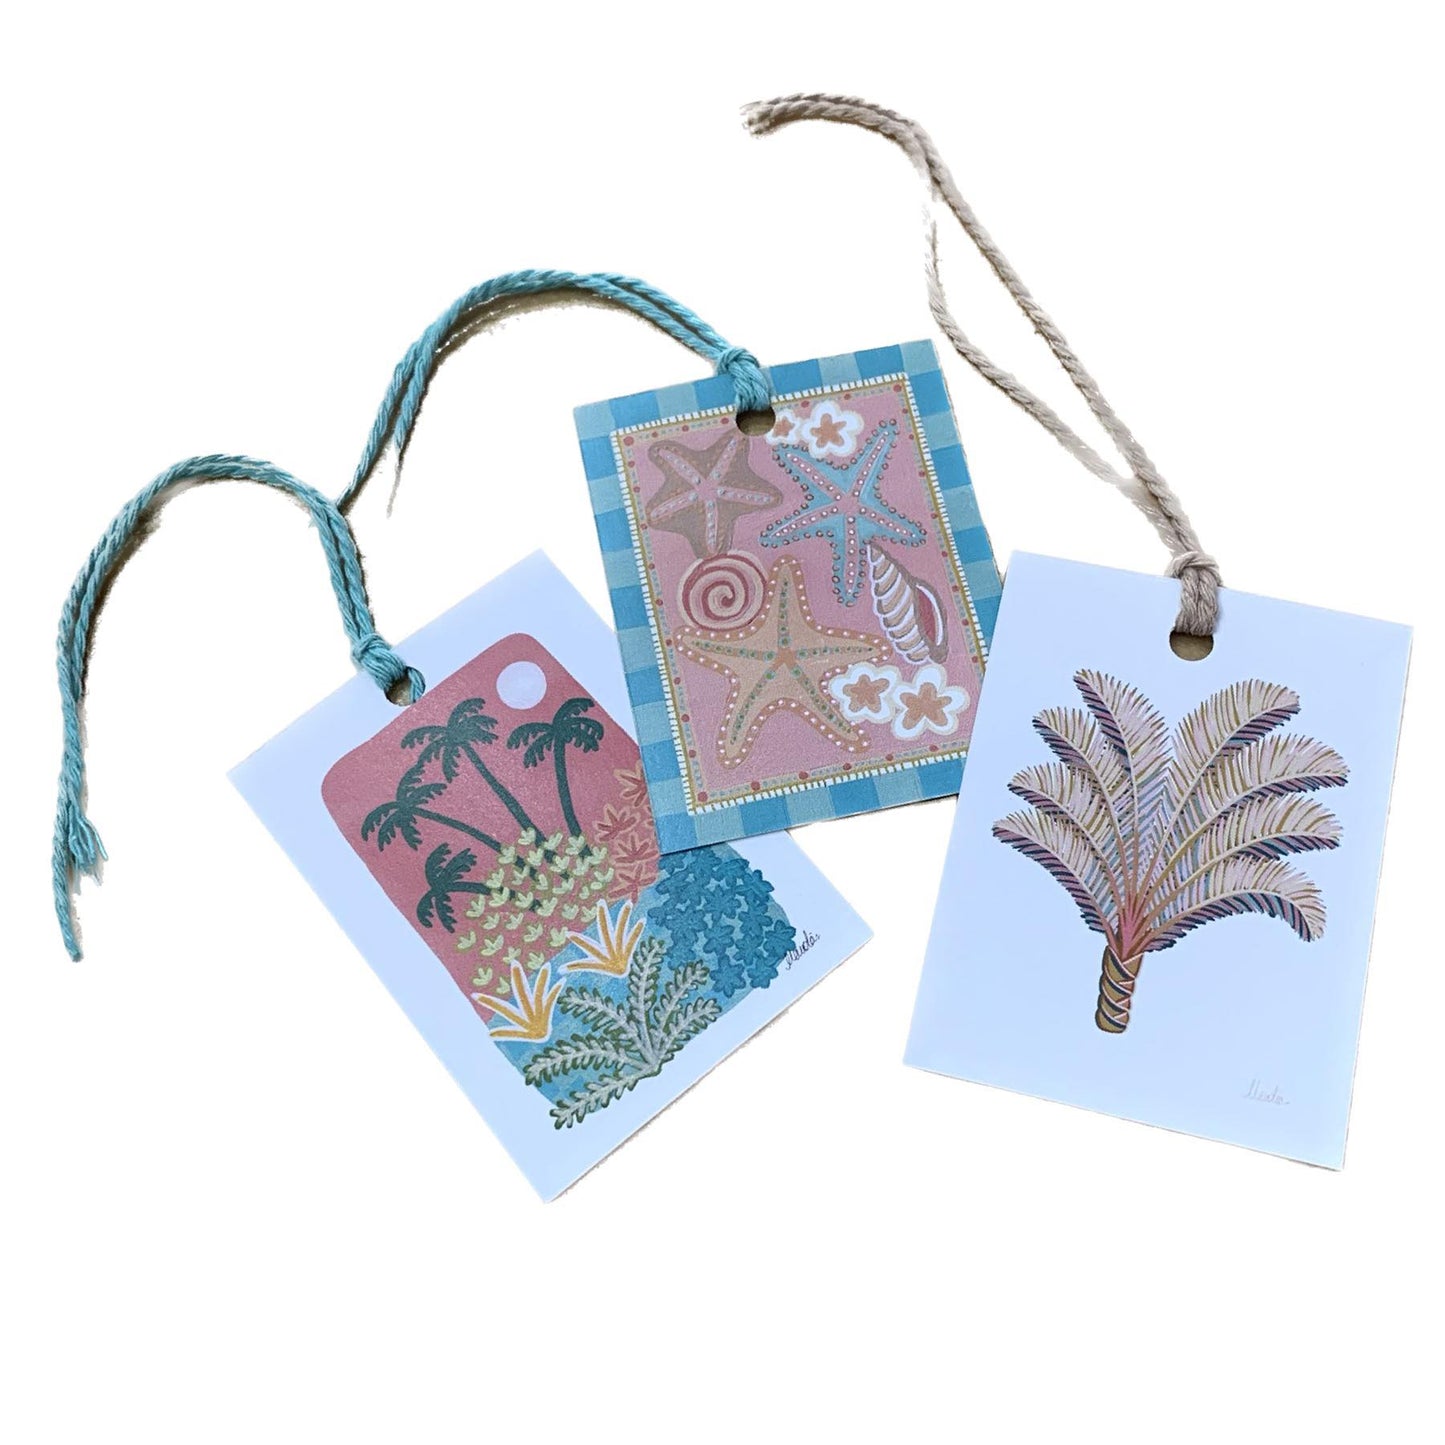 Designs by Claudia - Fan Palm Gift Tag